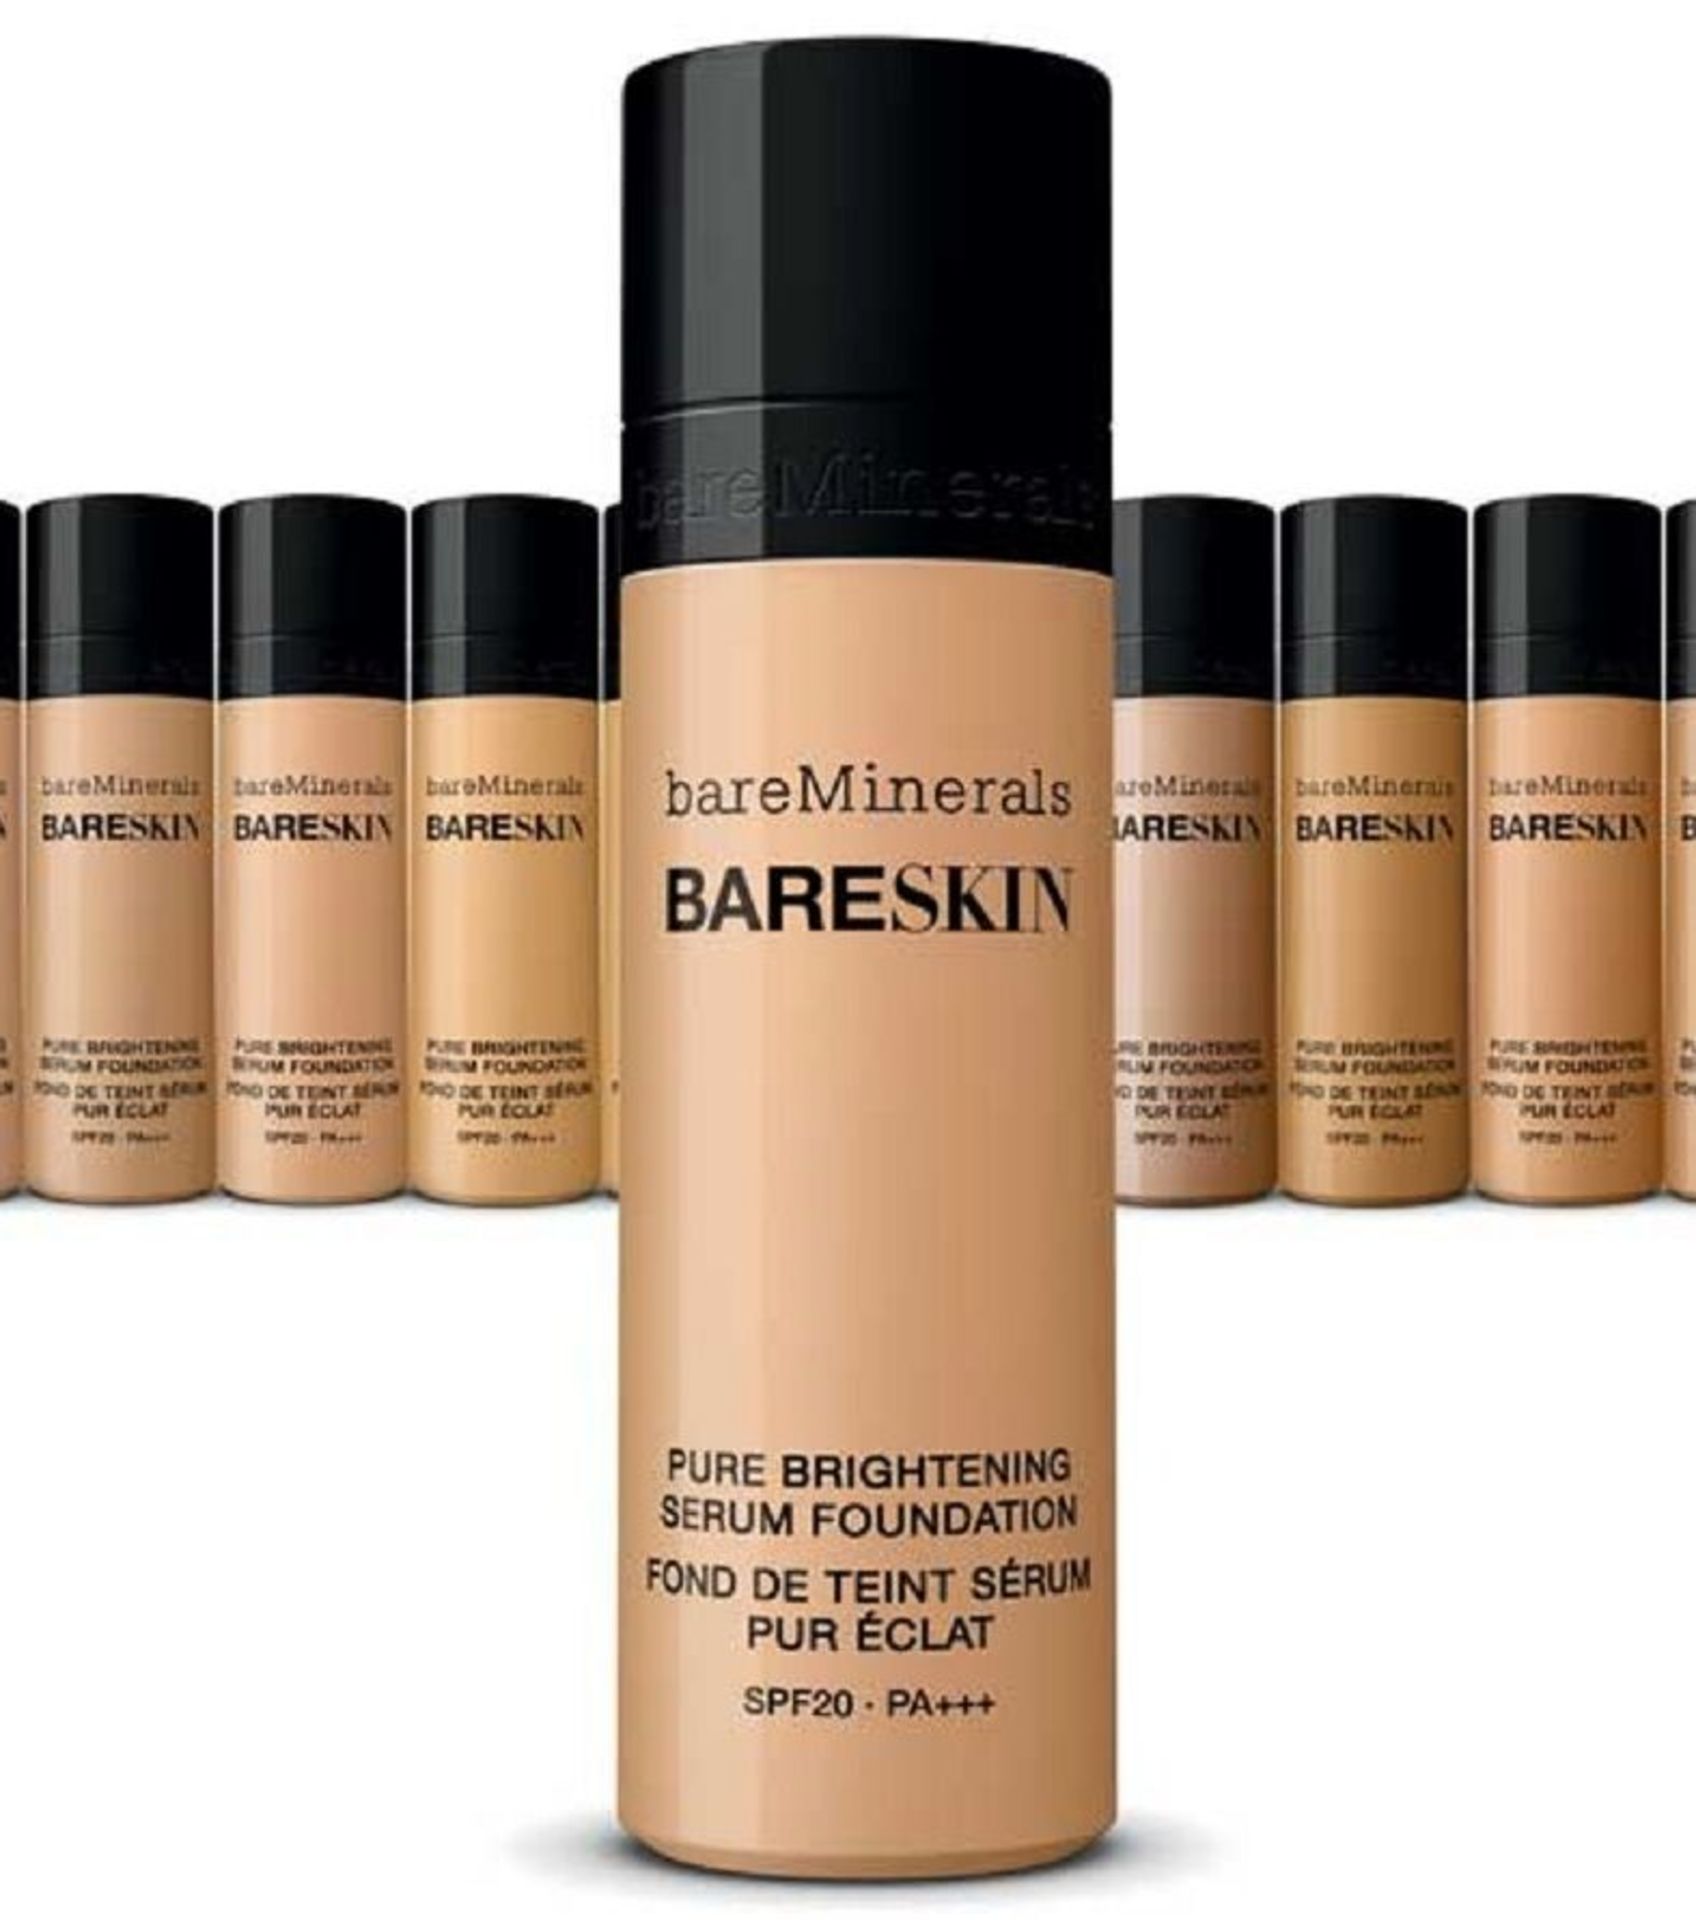 1 x Bare Escentuals bareMinerals “BARESKIN” Perfecting Face Brush - Genuine Product - Brand New - Image 12 of 14